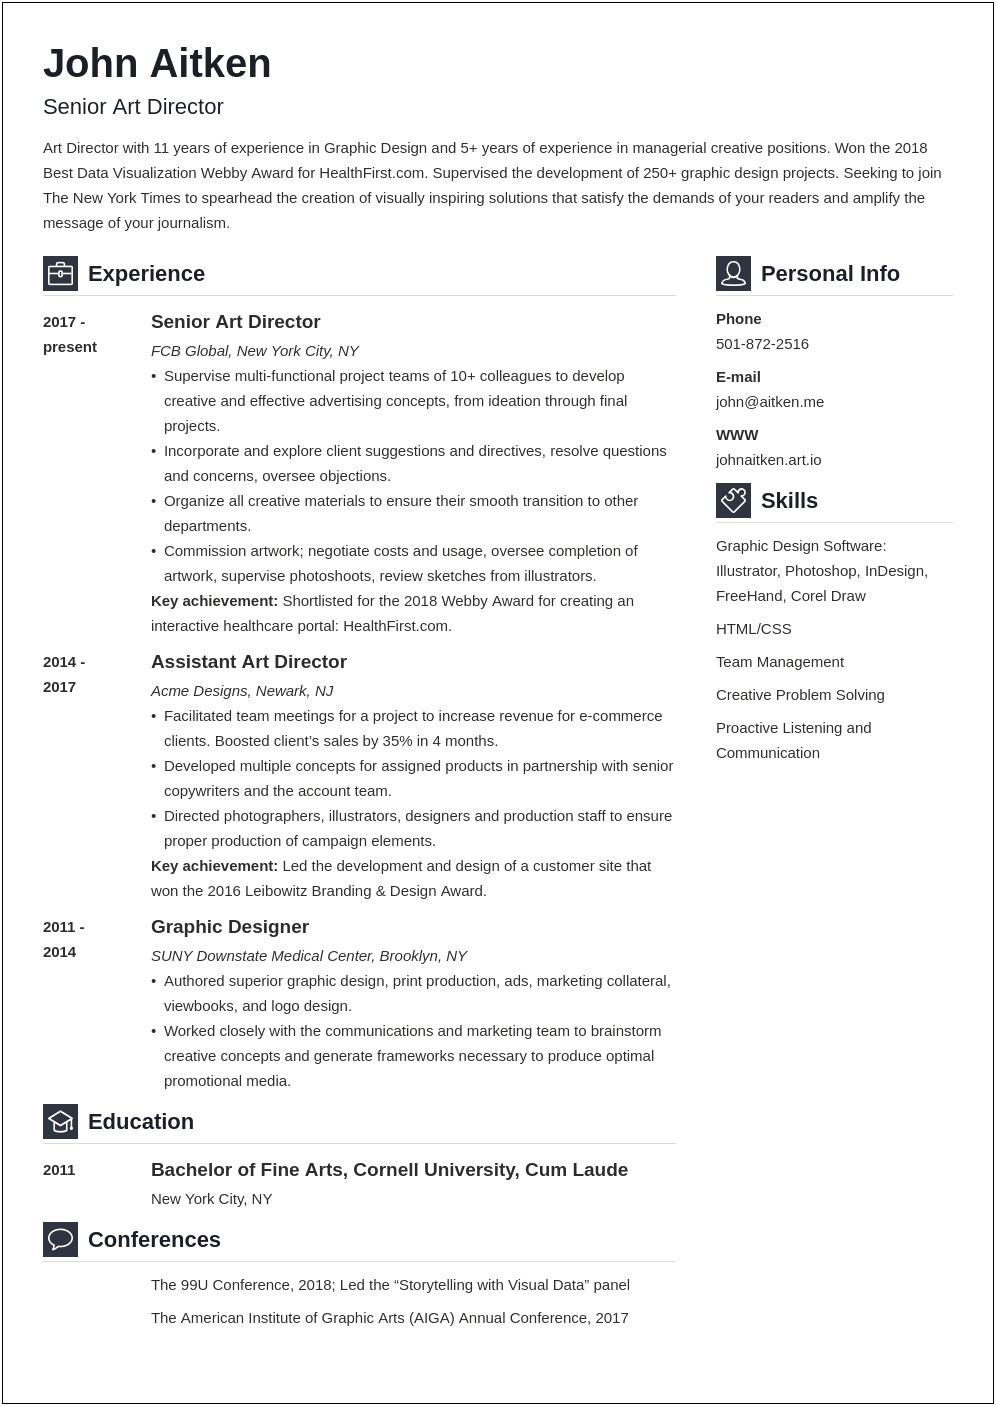 Director Of Photography & Media Manager On A Resume